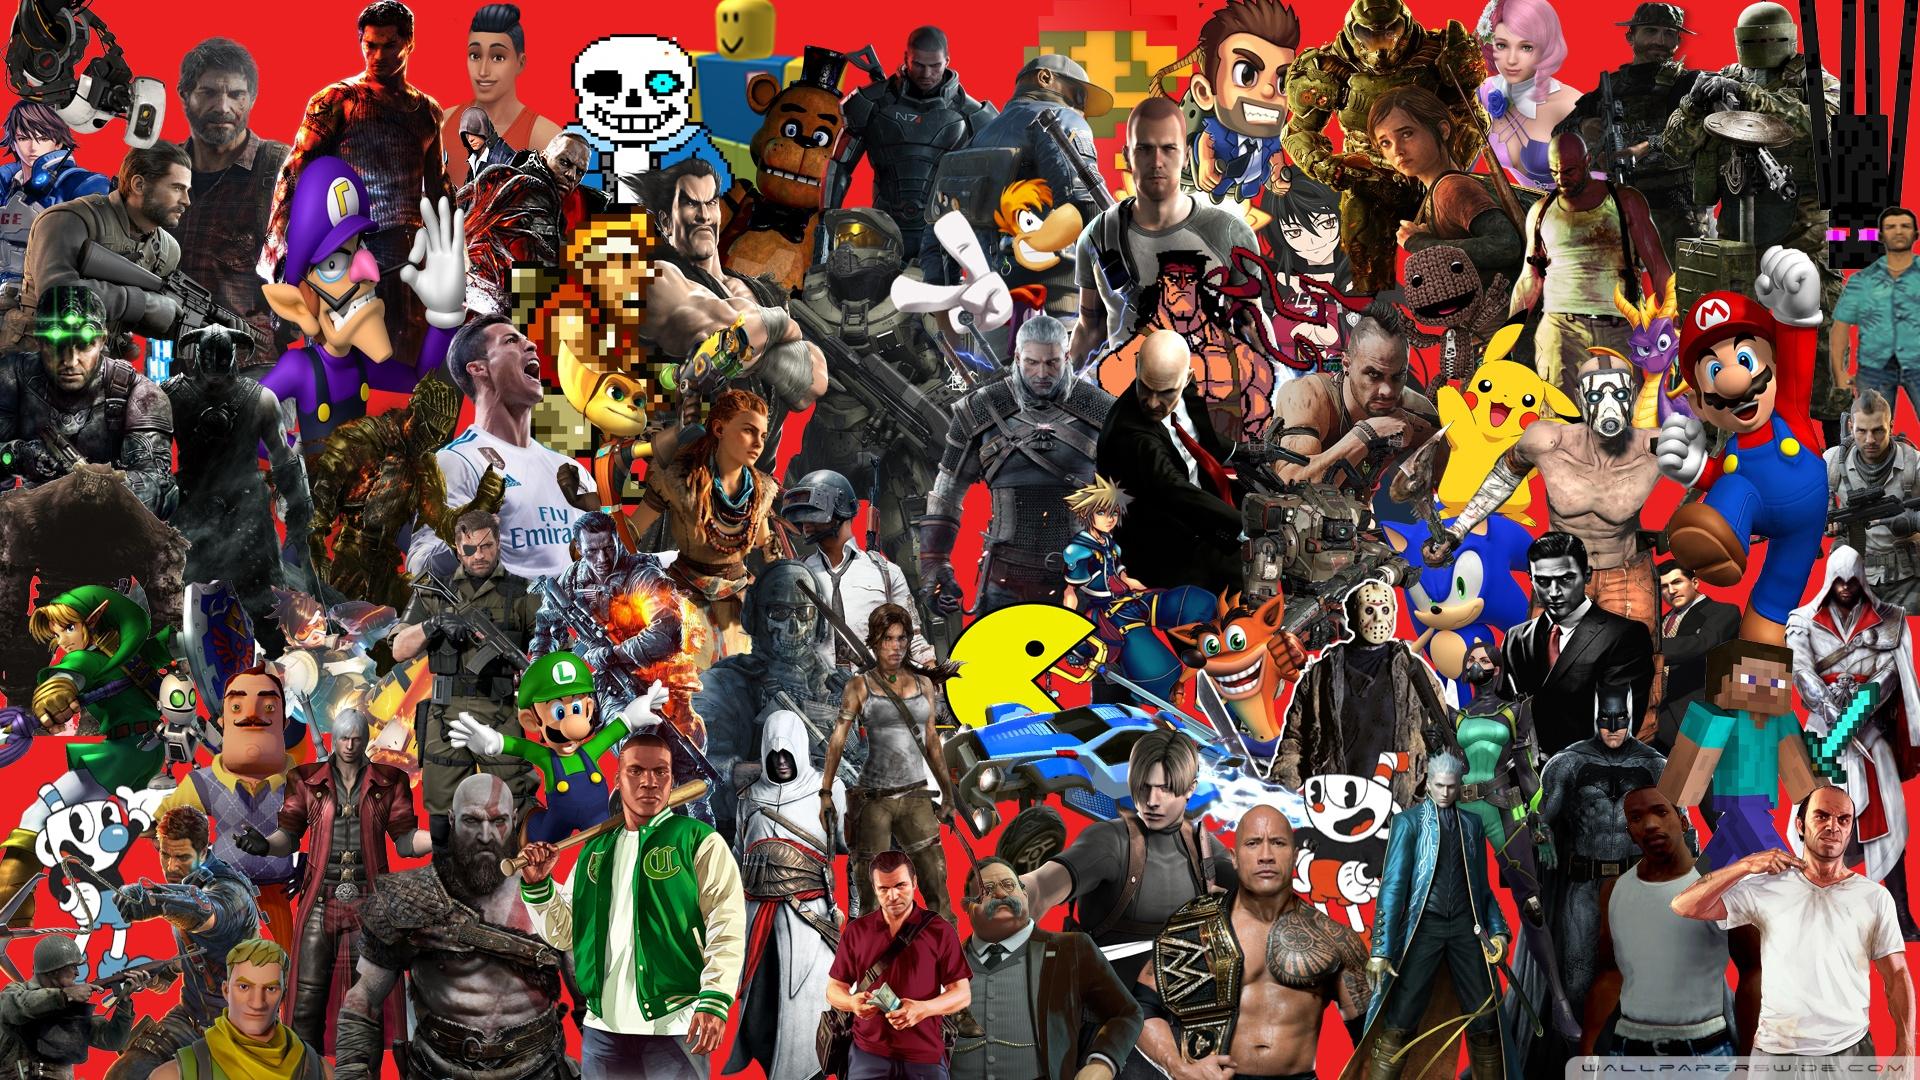 Face to many videogame